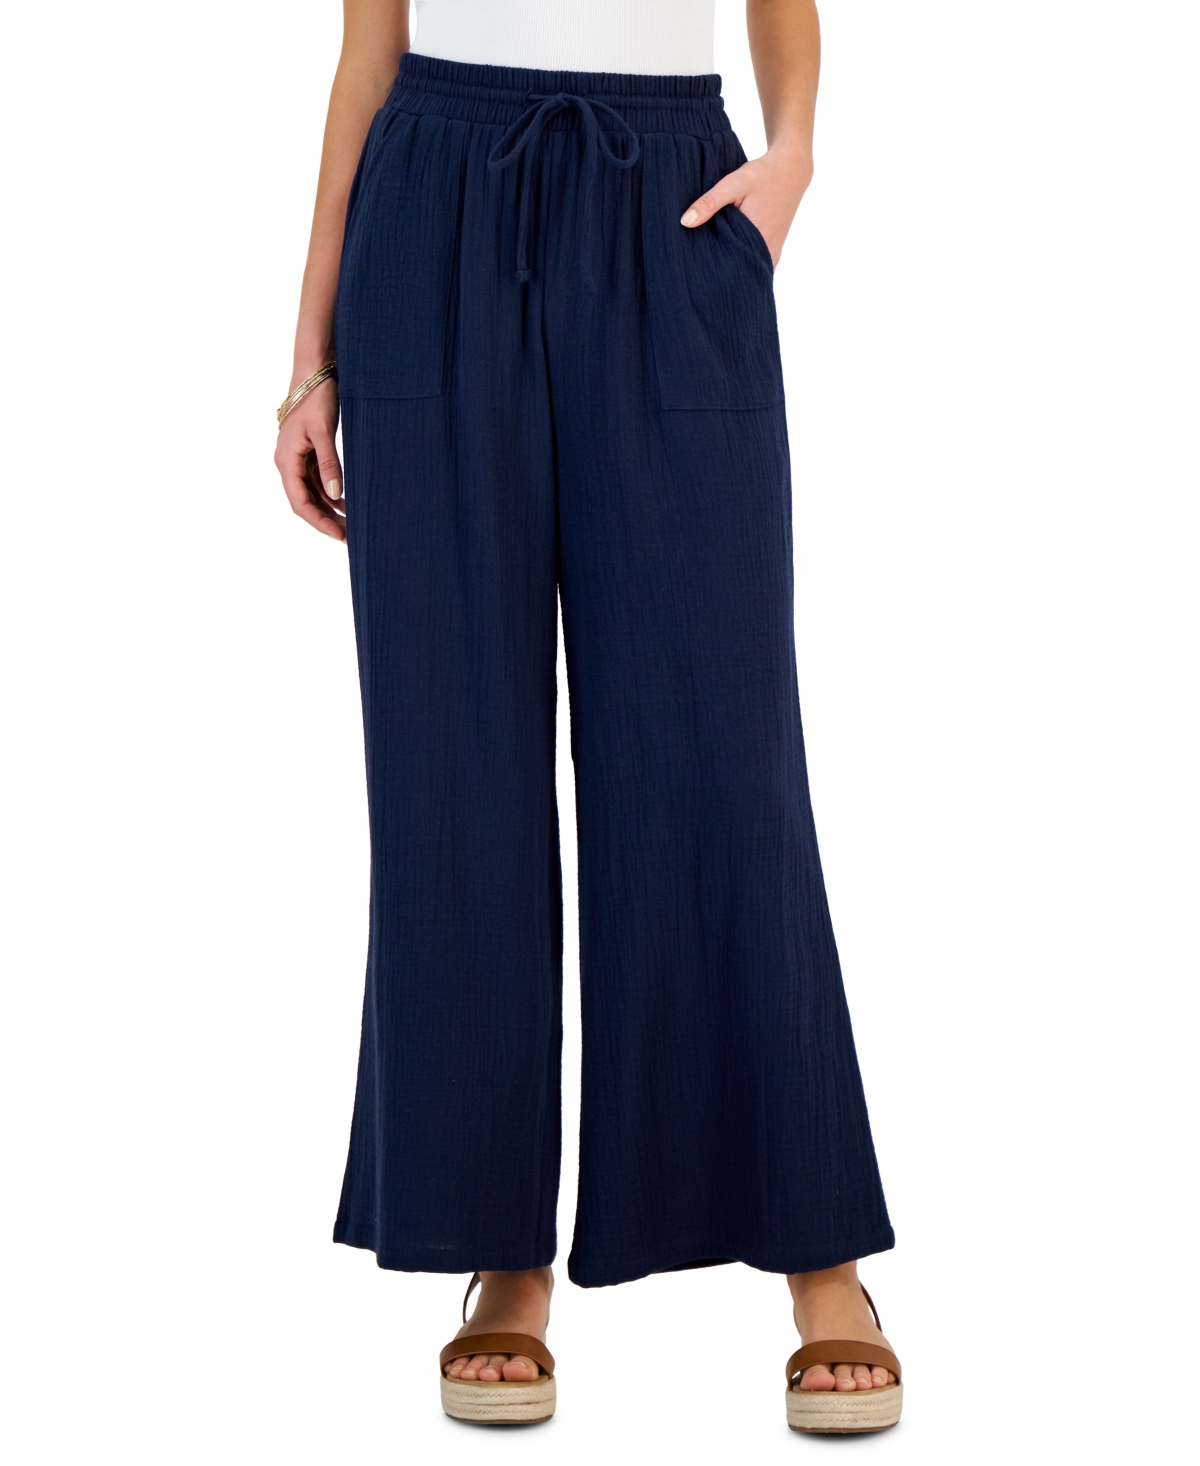 STYLE & CO WOMEN'S CRINKLED WIDE-LEG PANTS, CREATED FOR MACY'S